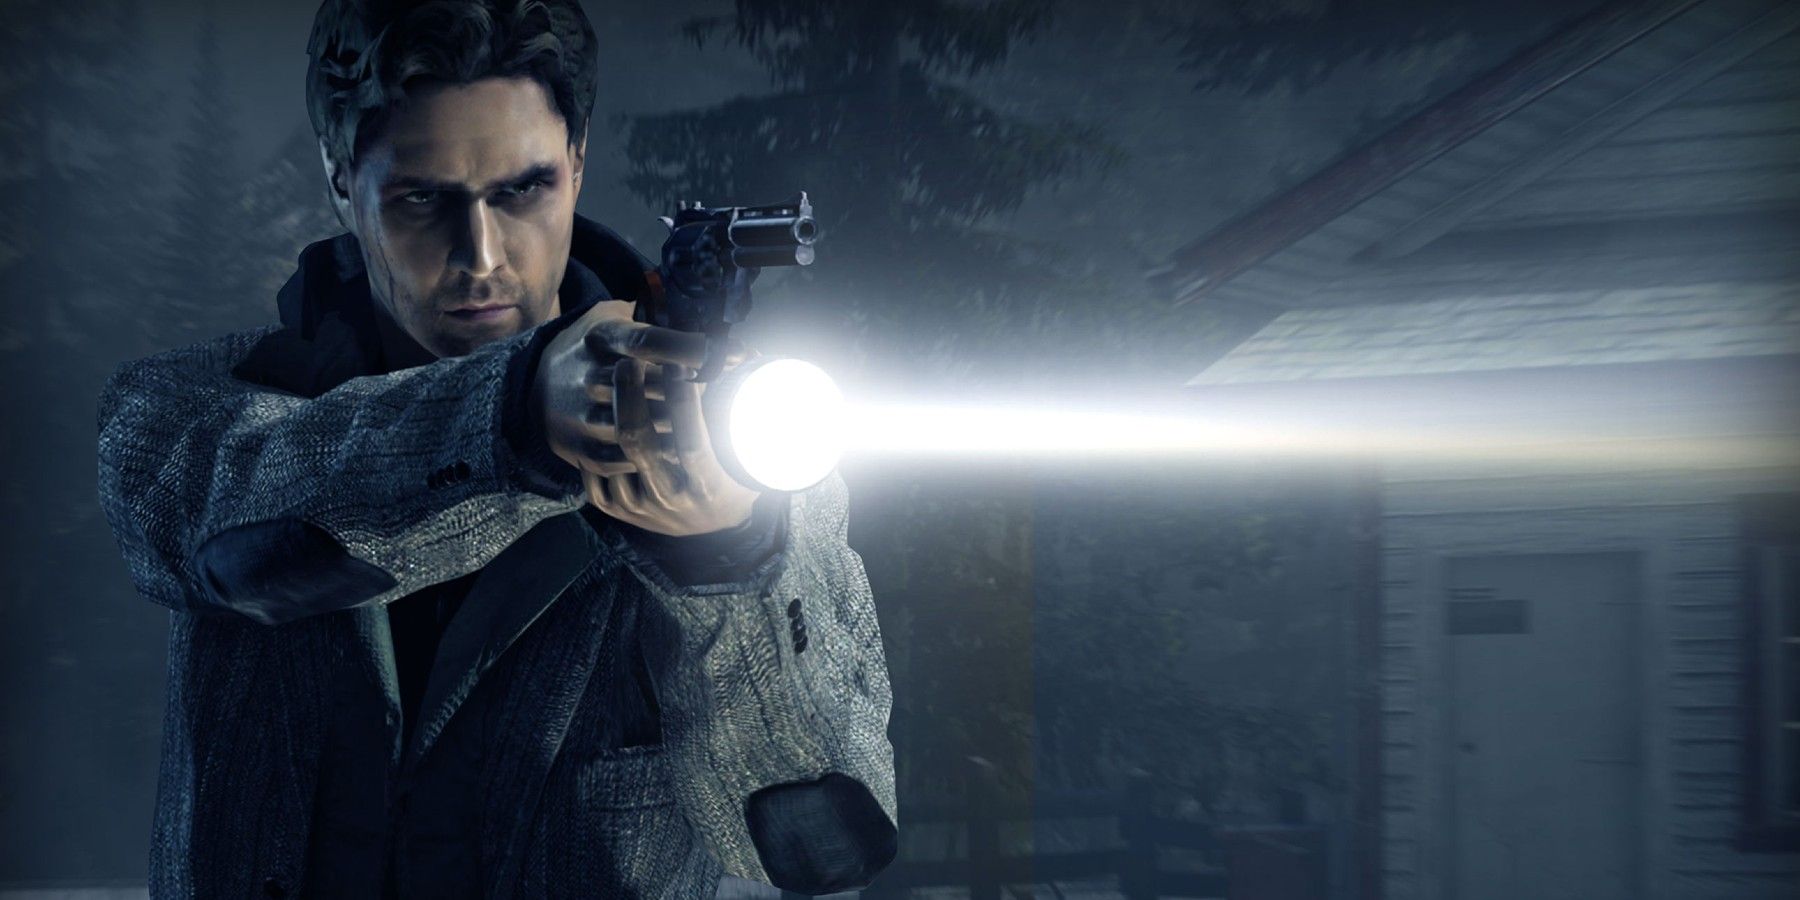 Promotional art for the first Alan Wake game with Alan pointing a revolver and flashlight